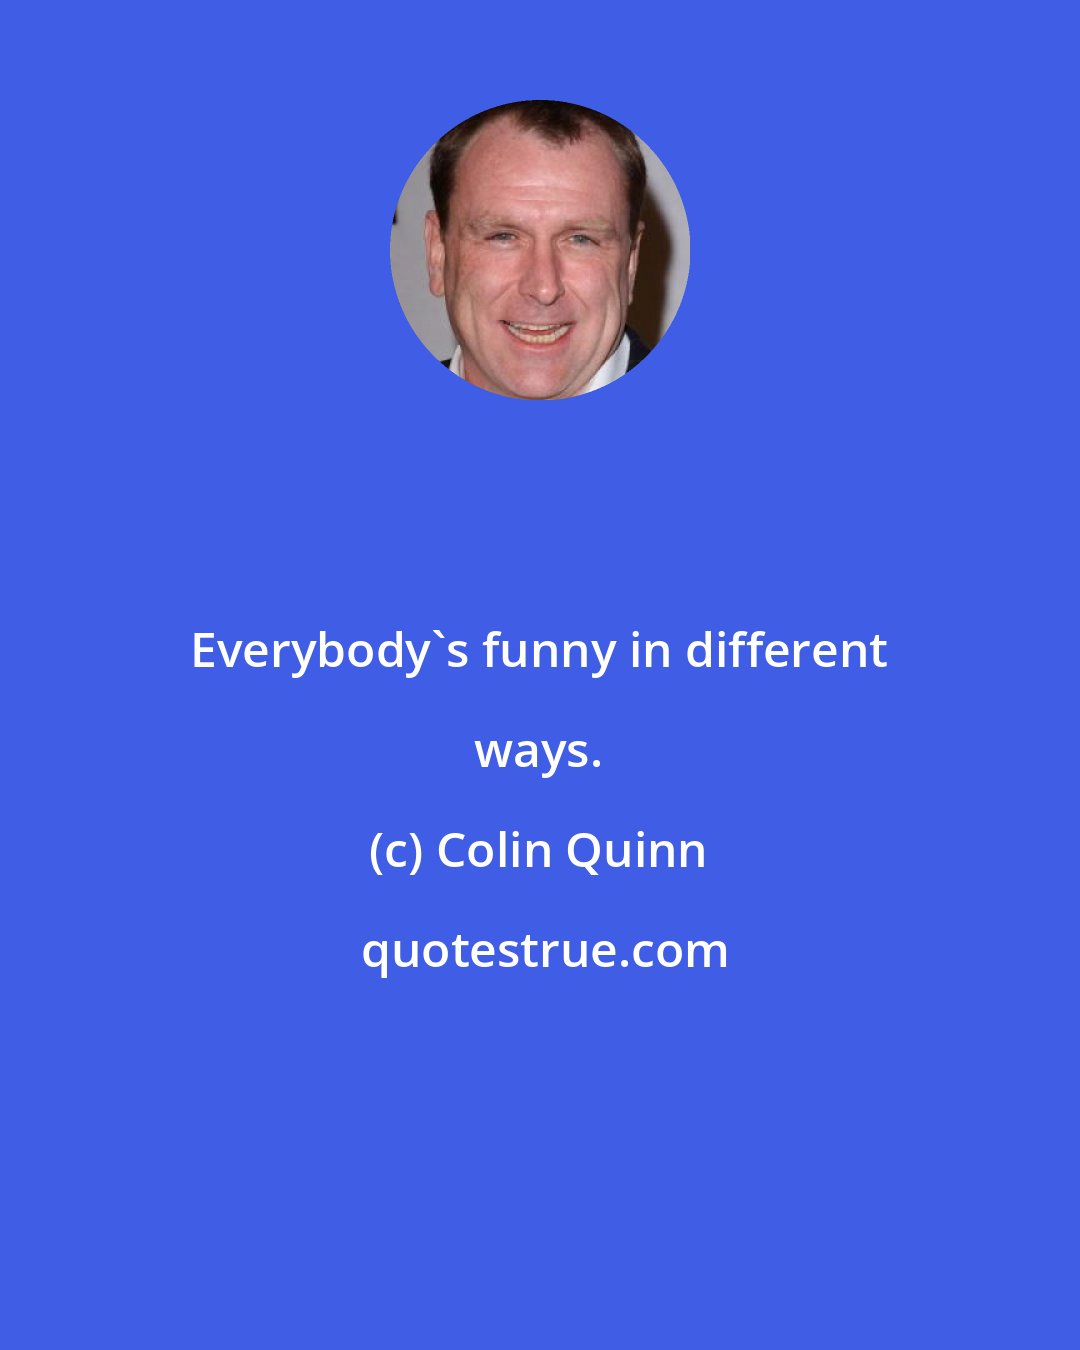 Colin Quinn: Everybody's funny in different ways.